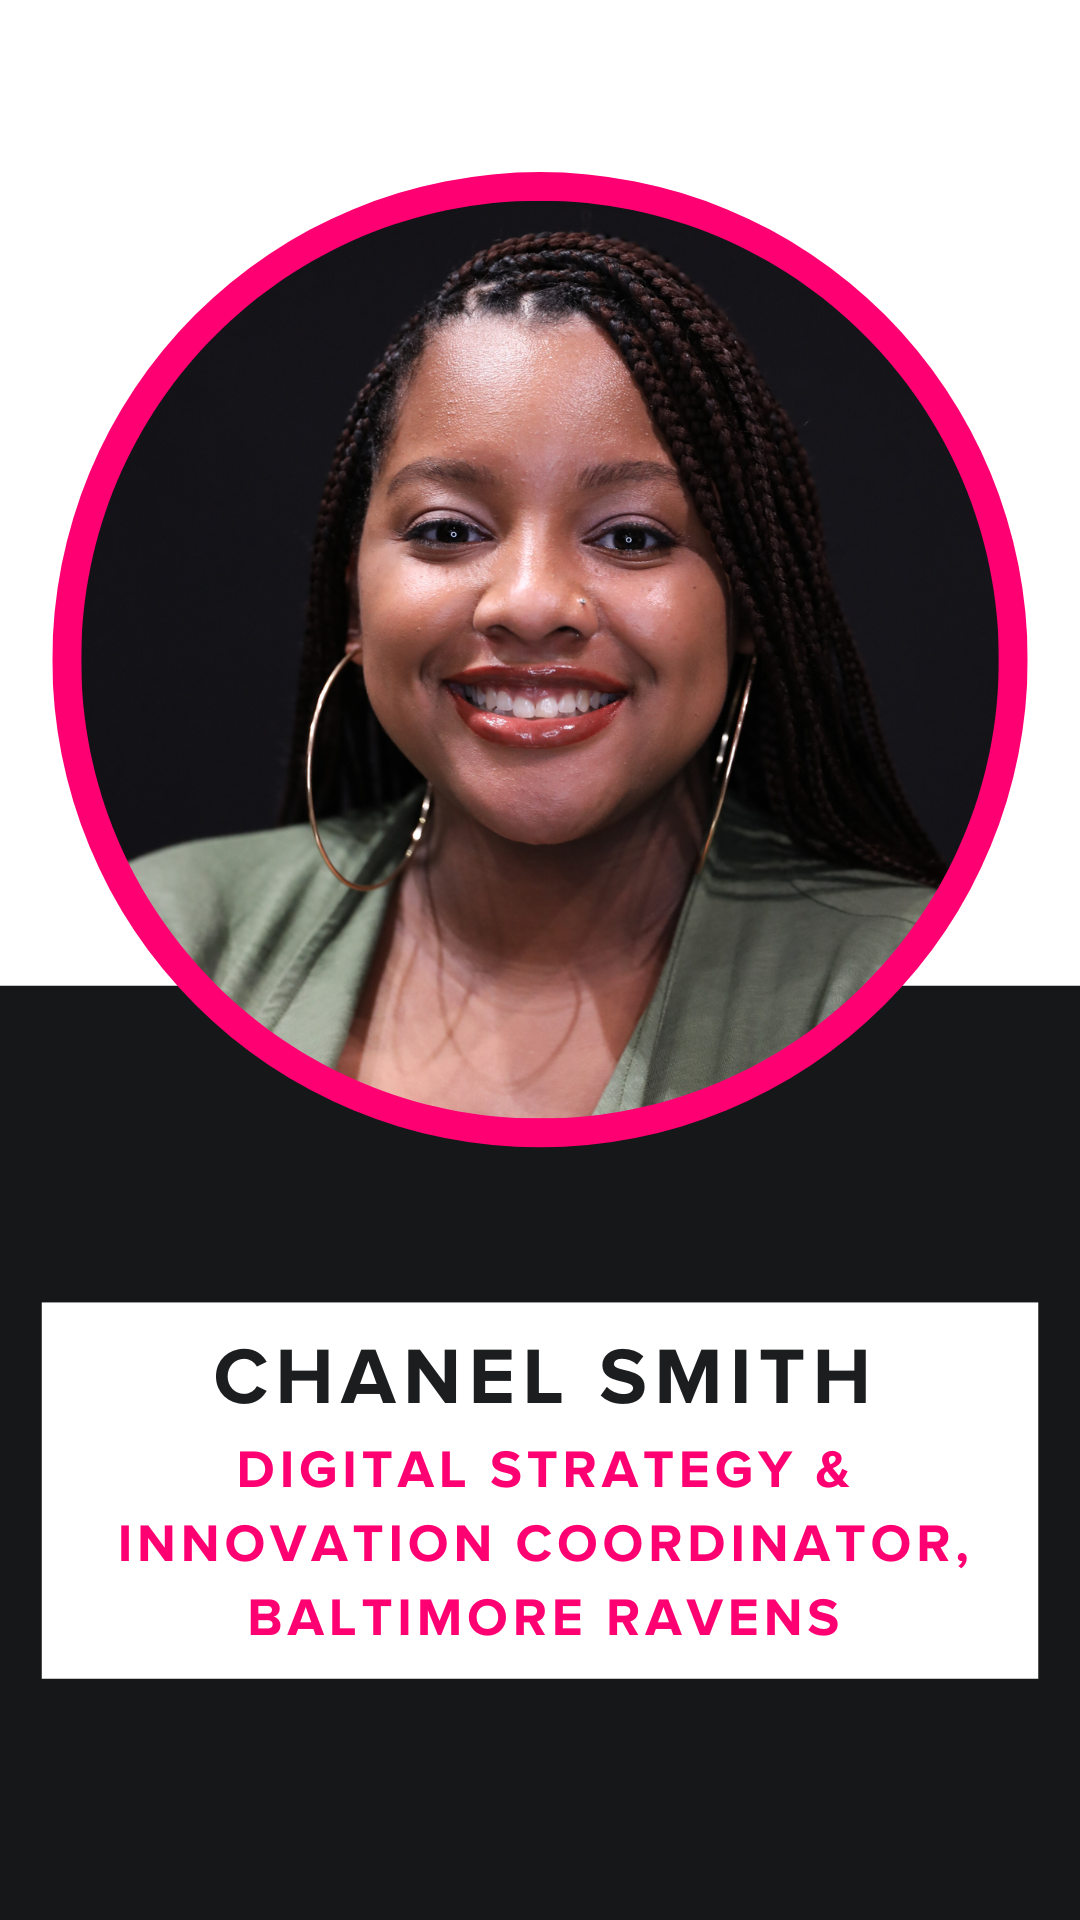 Chanel Smith